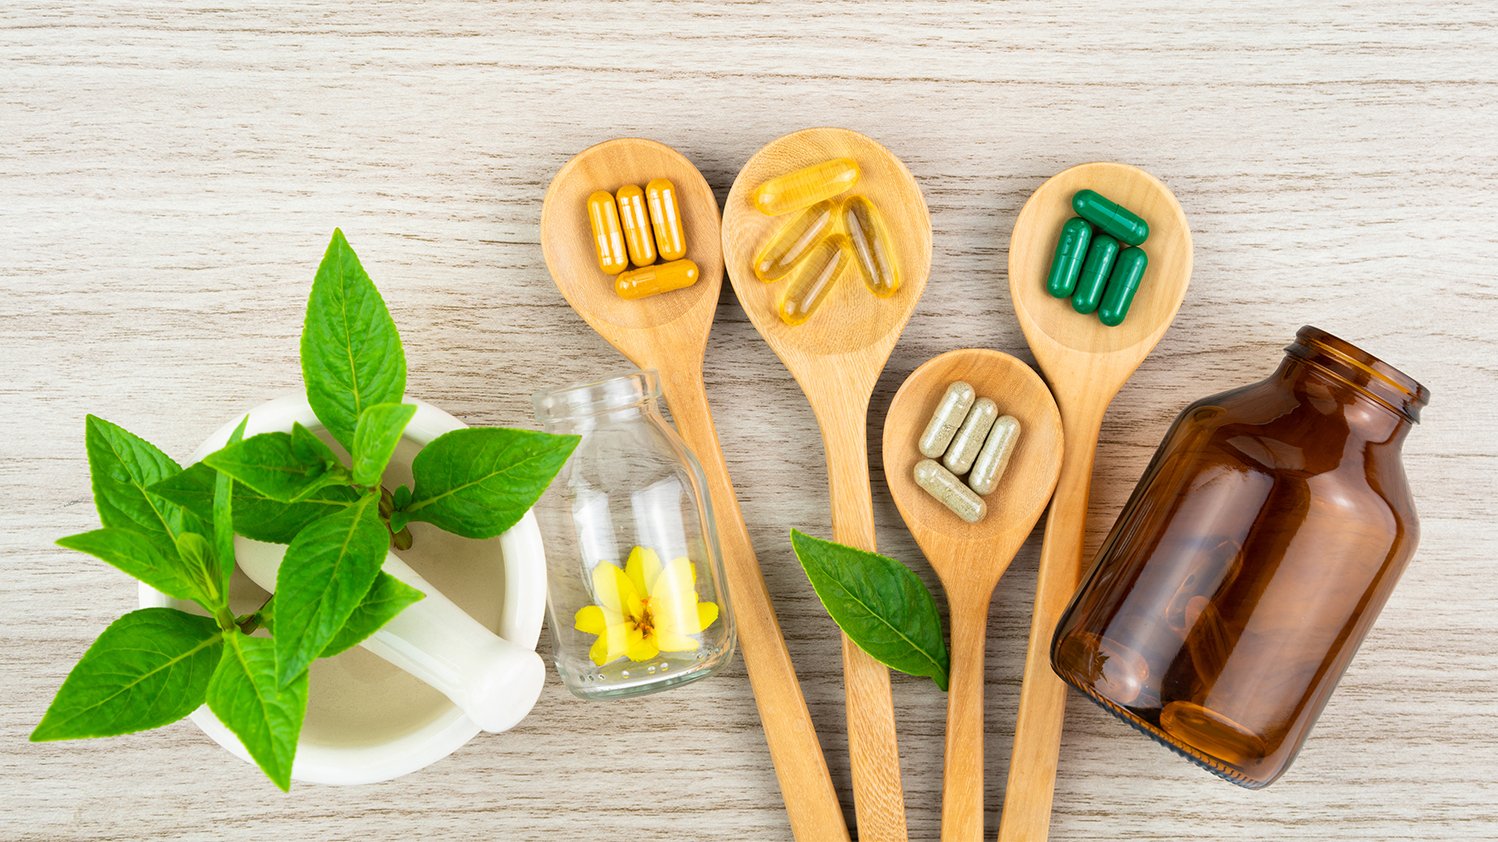 Before You Buy Another Hair Supplement - Read This